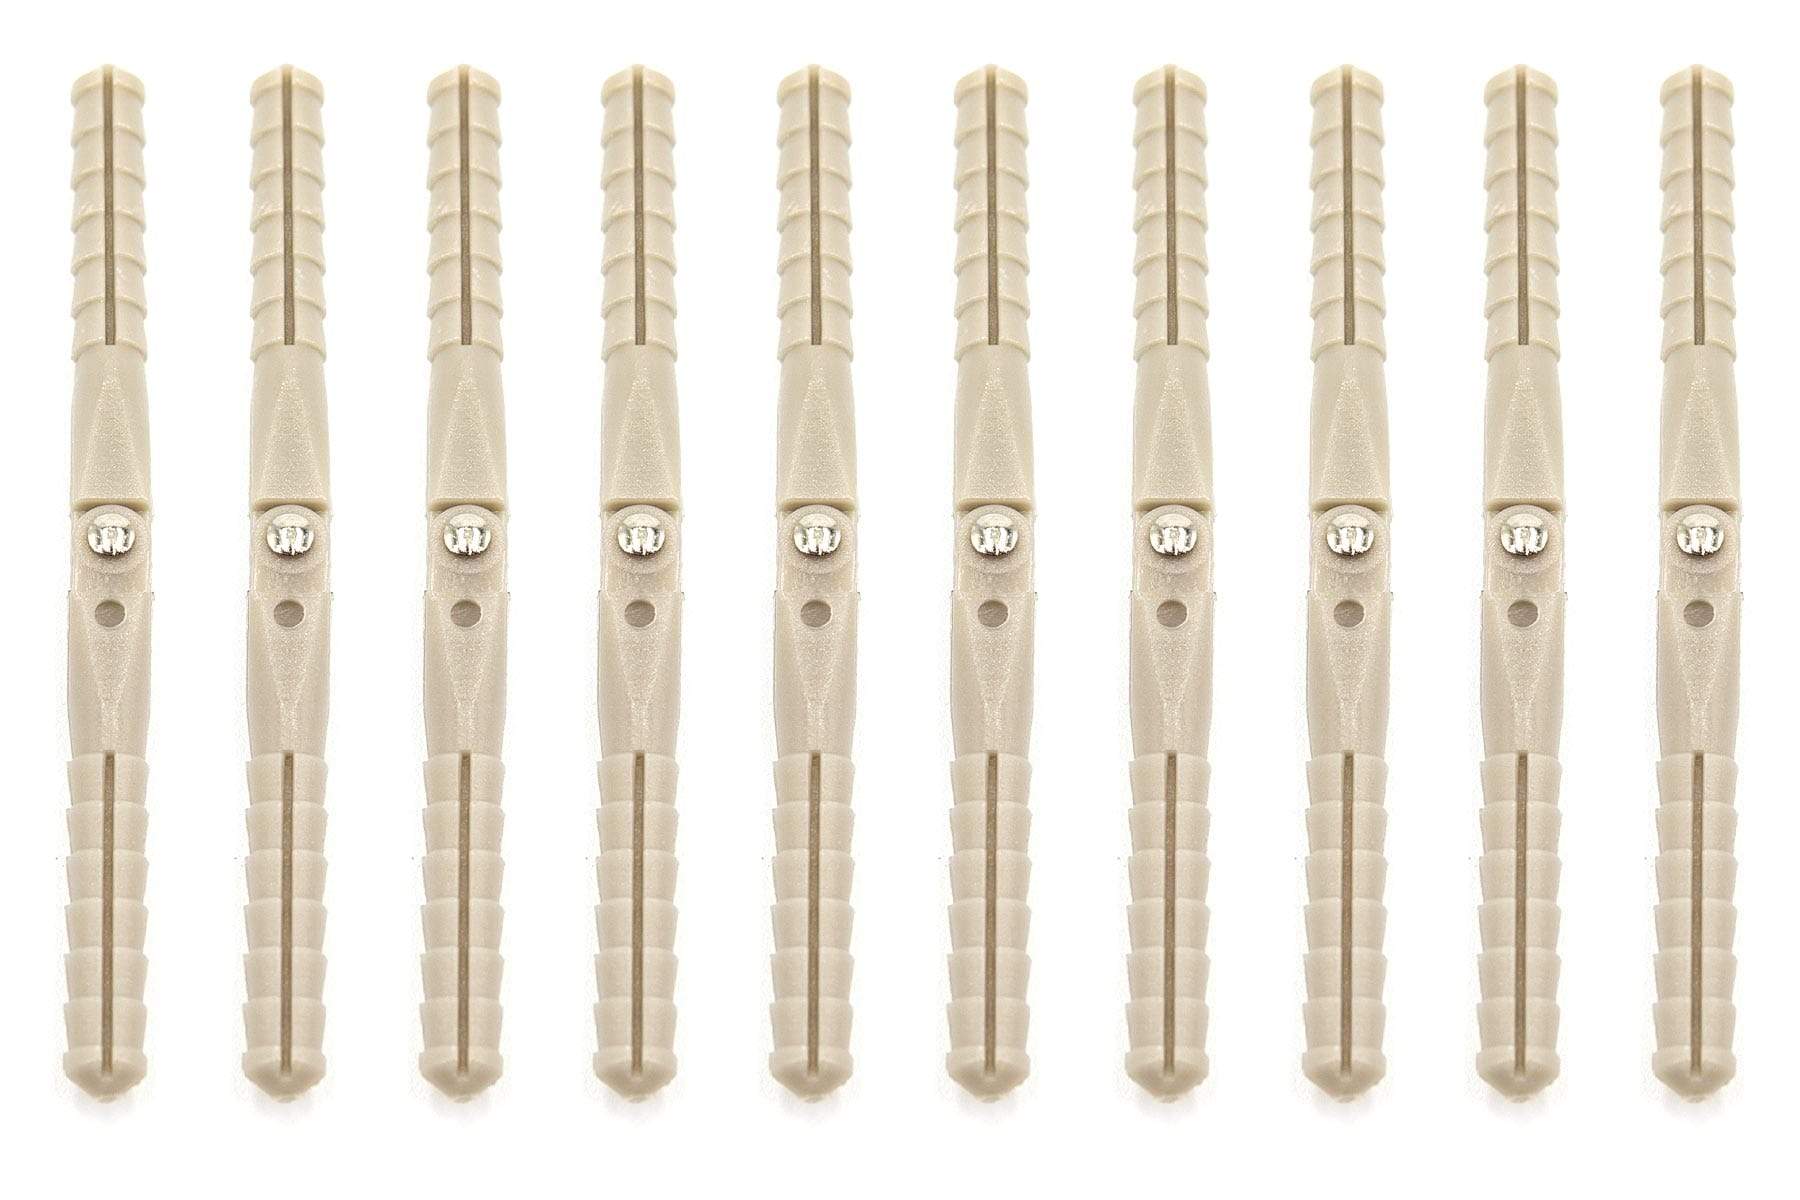 BenchCraft 4.5mm x 67mm Pinned Hinges (10 Pack) BCT5044-004